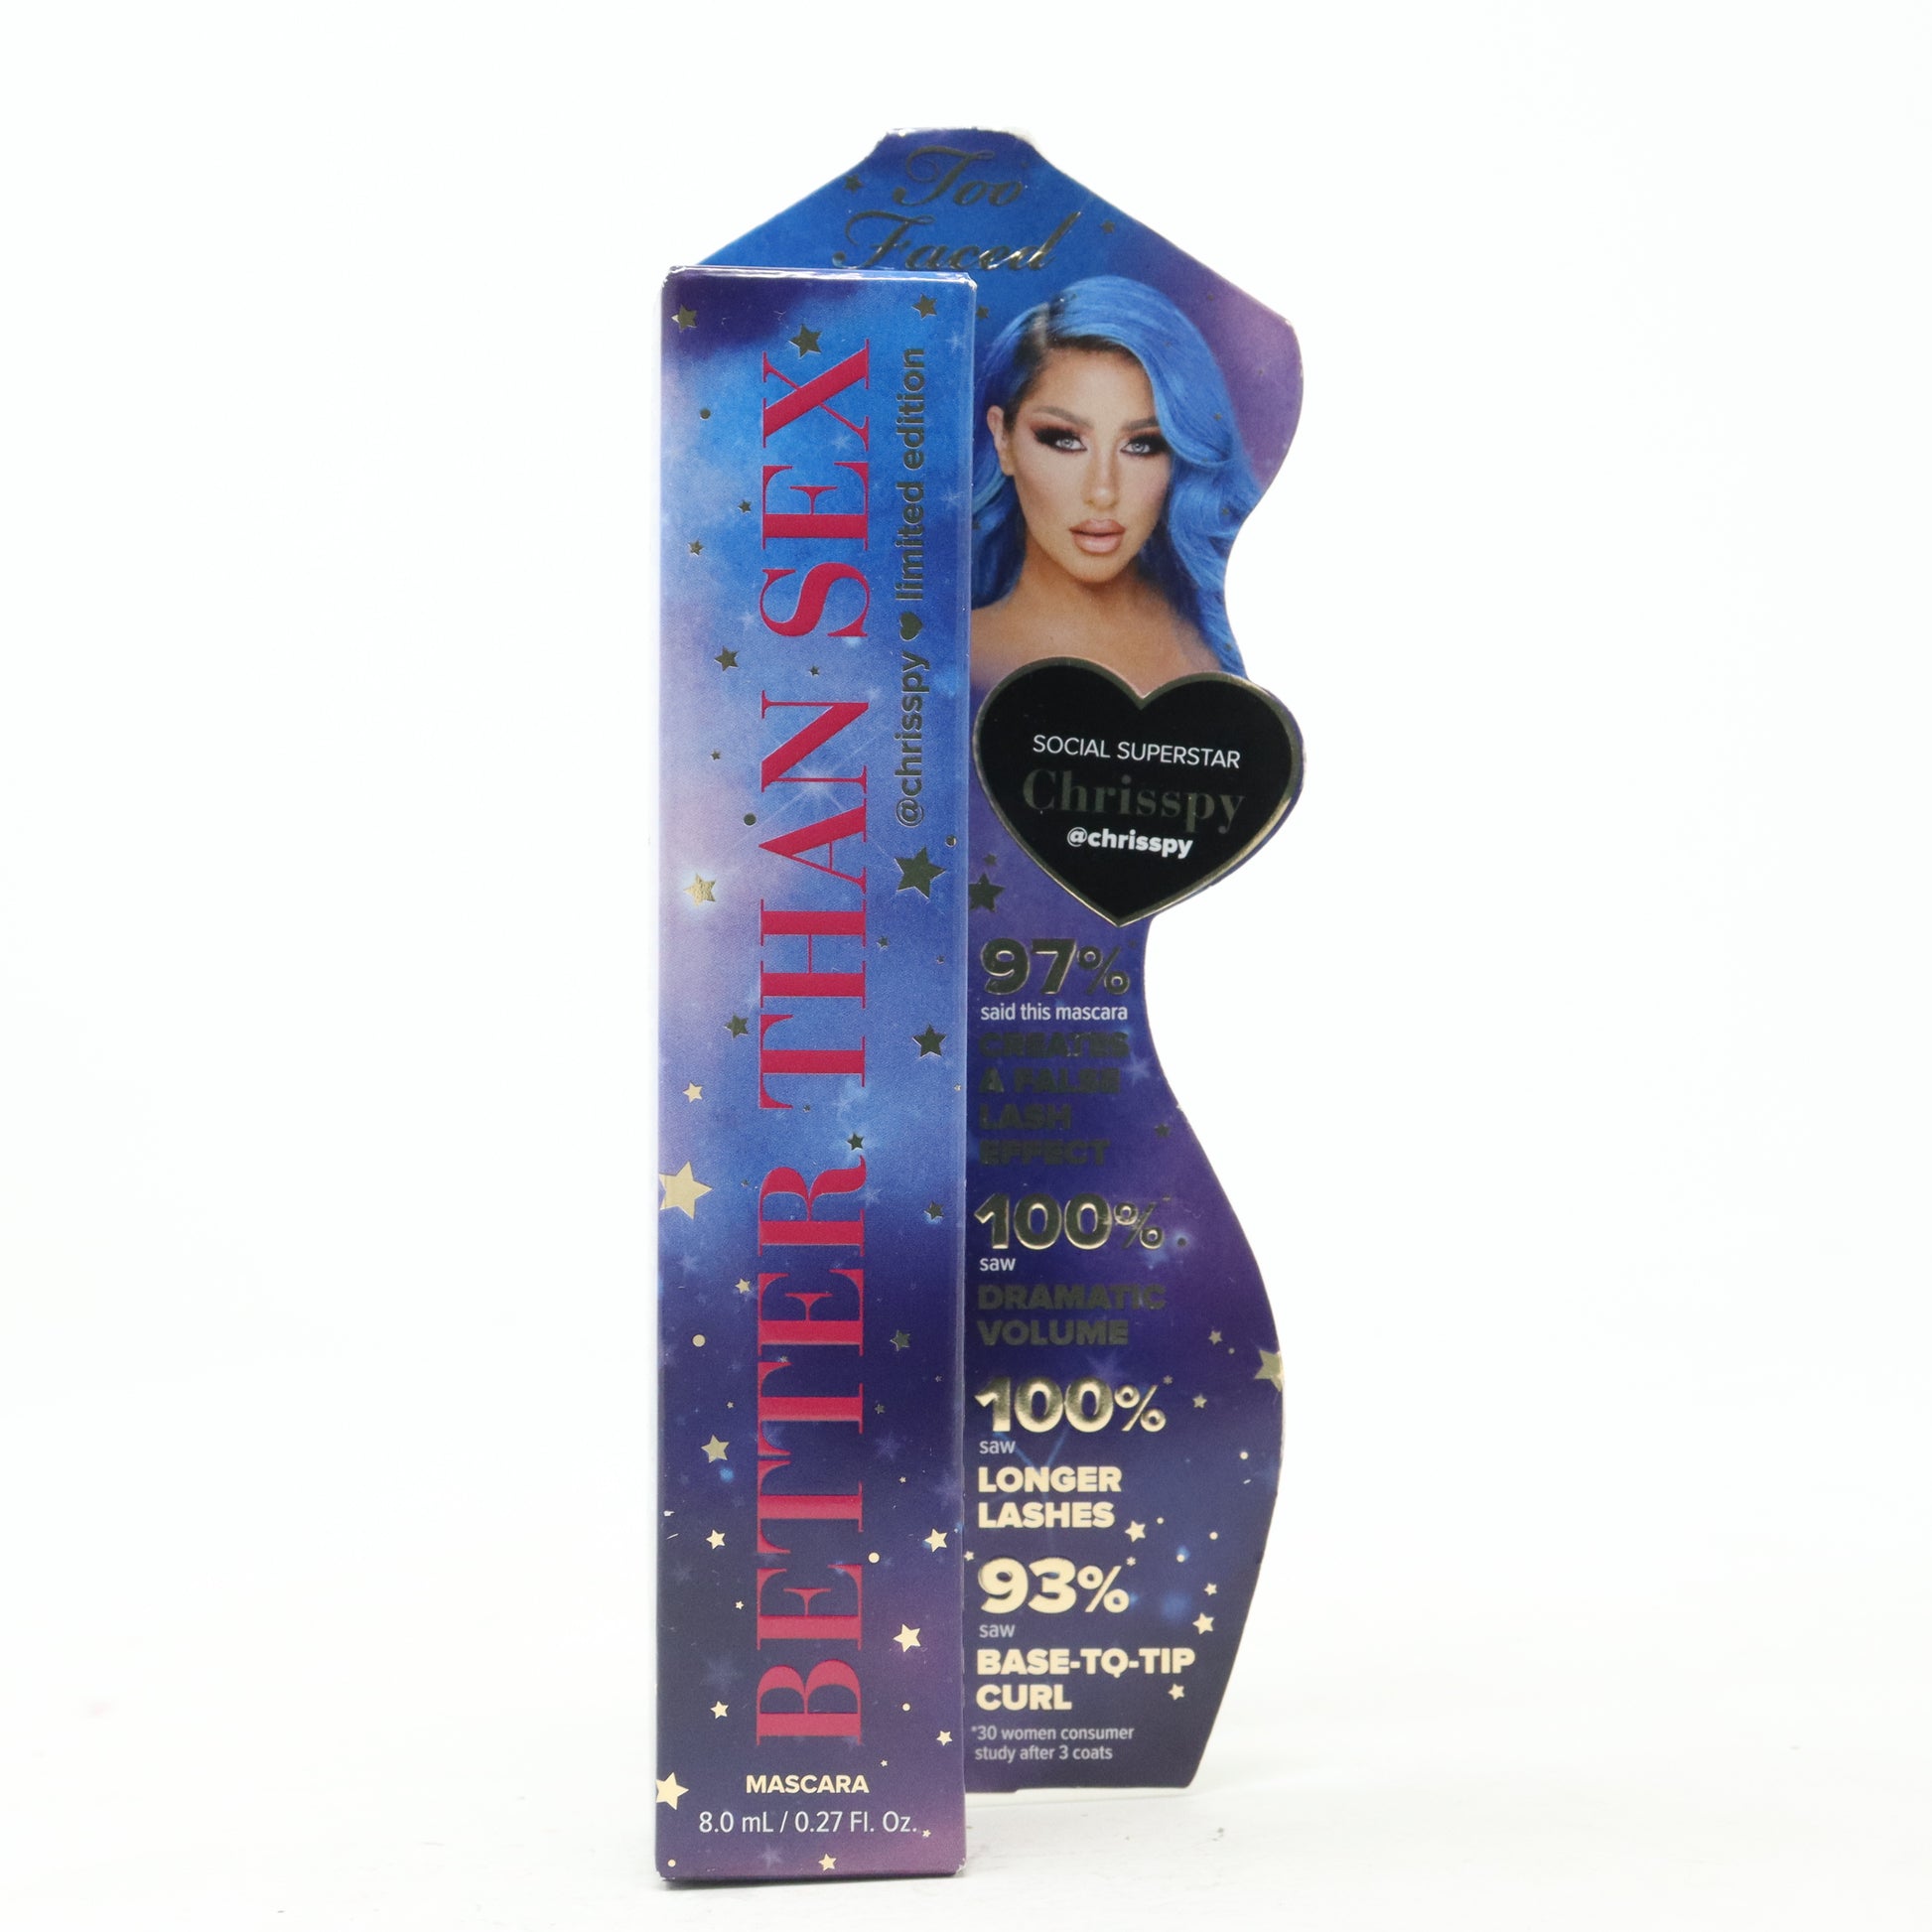 Better Than Sex Limited Edition Mascara 8.0 ml